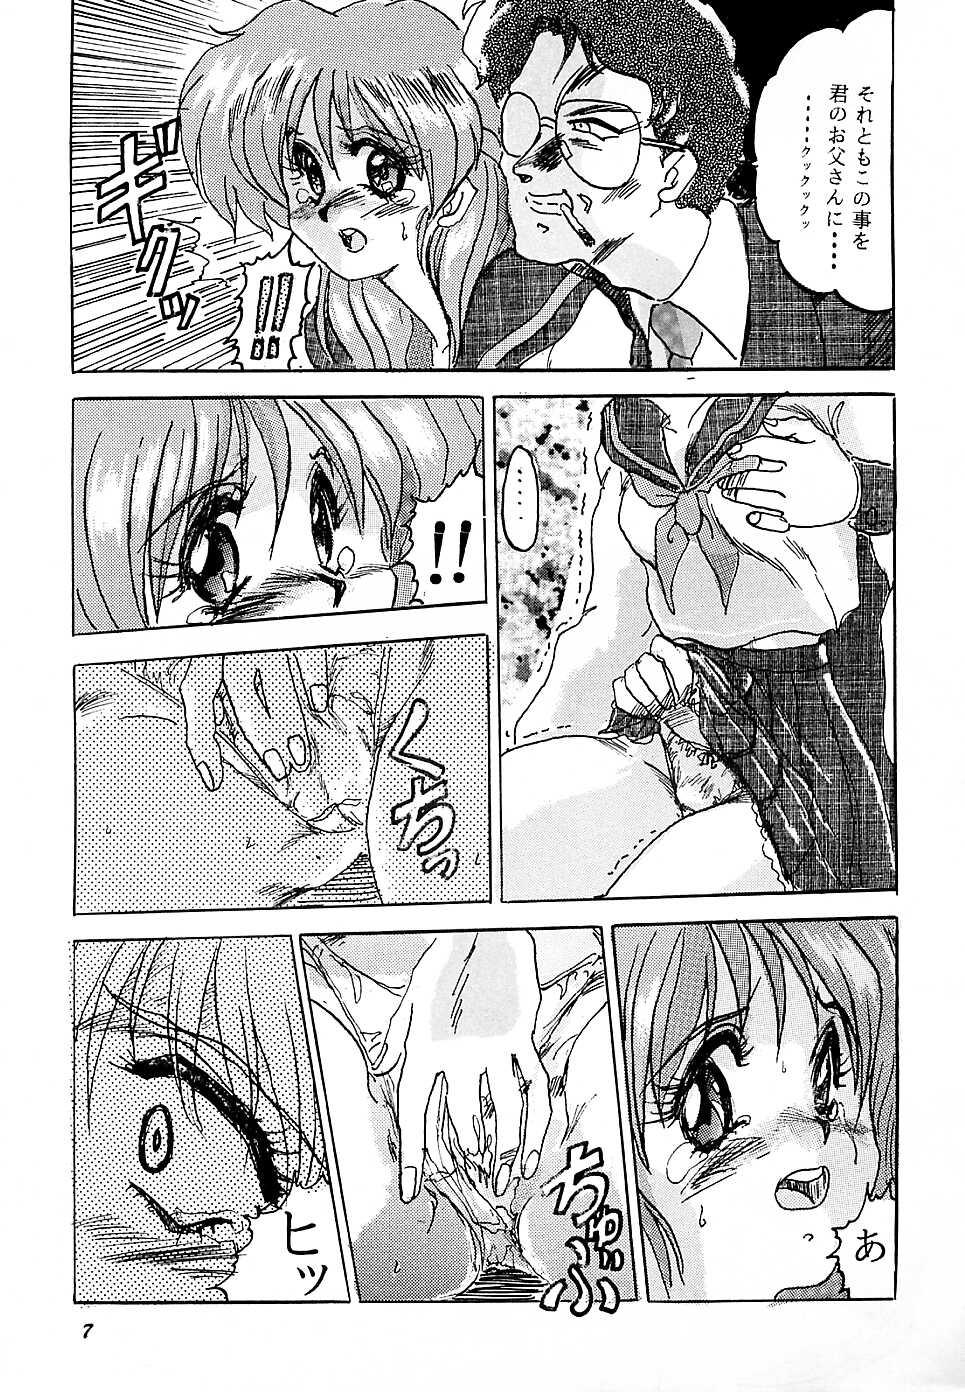 Curves F 93C - Brave express might gaine Heels - Page 6